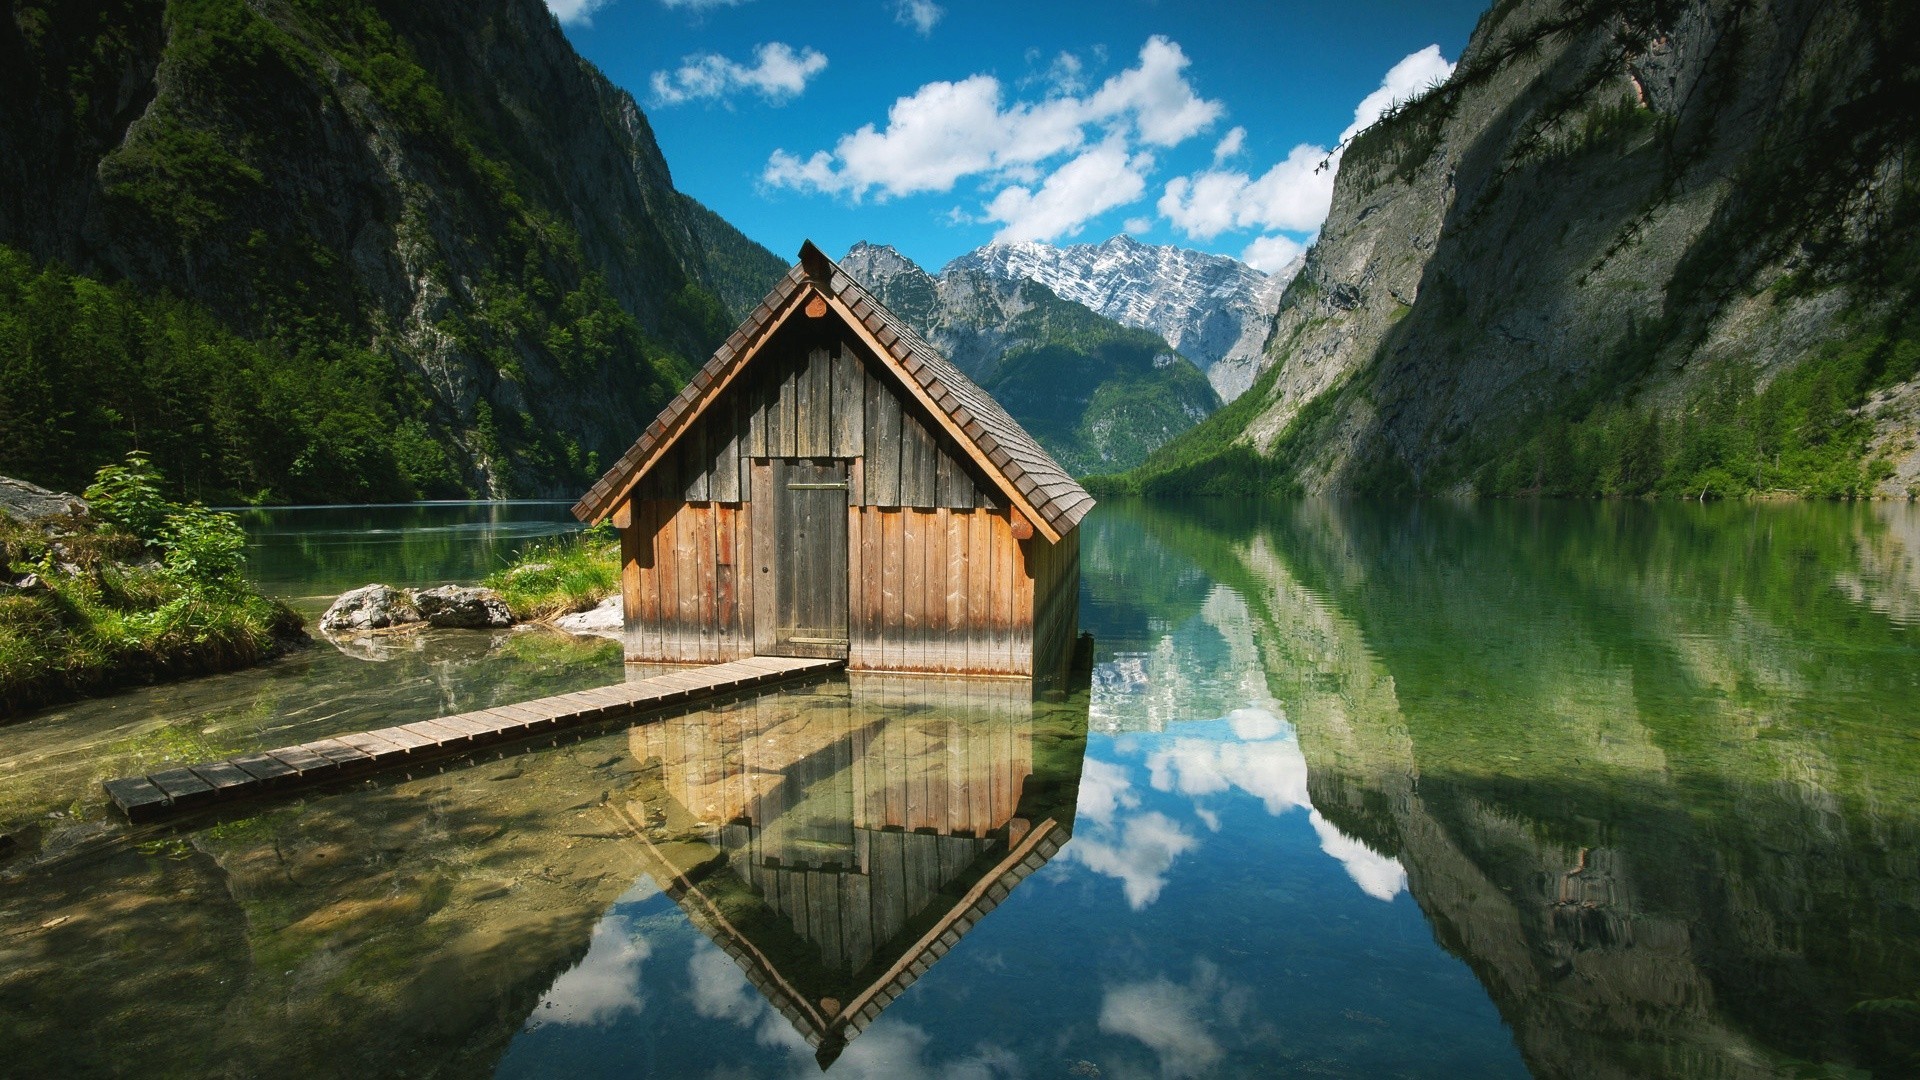 Lake Cabin Reflection Mountains Clouds Nature Landscape Obersee Obersee Lake 1920x1080